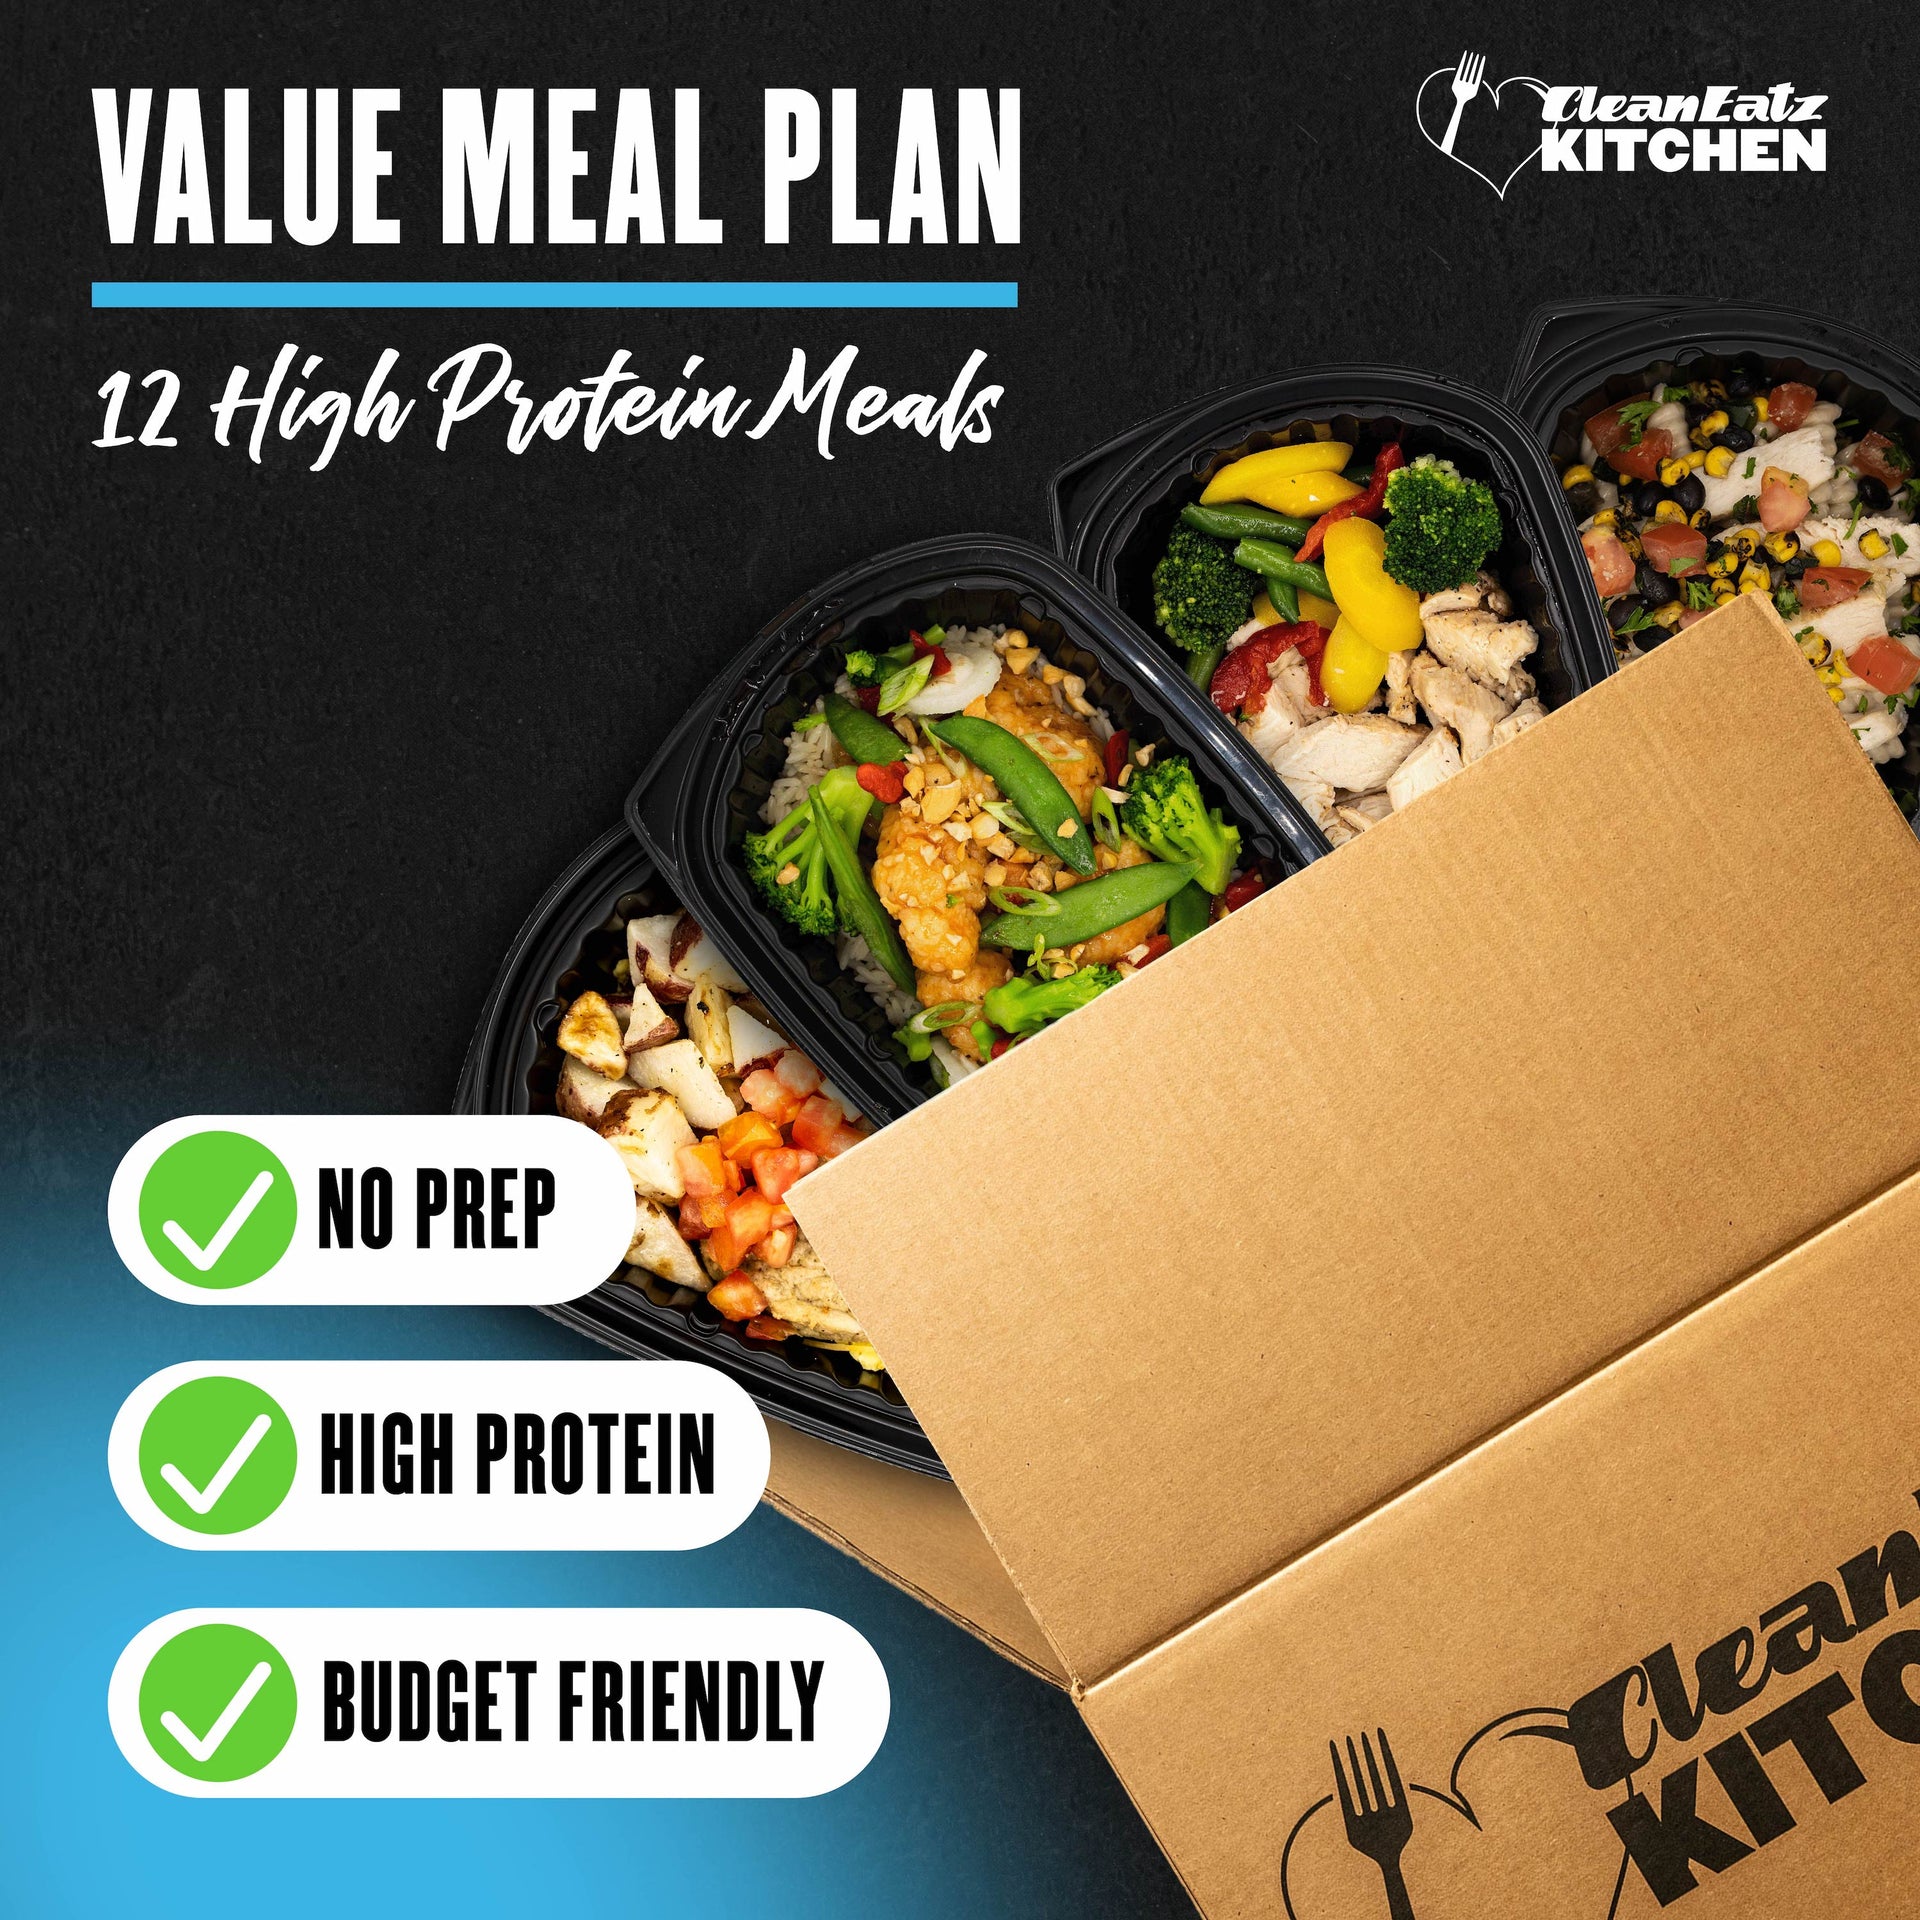 Value meal options